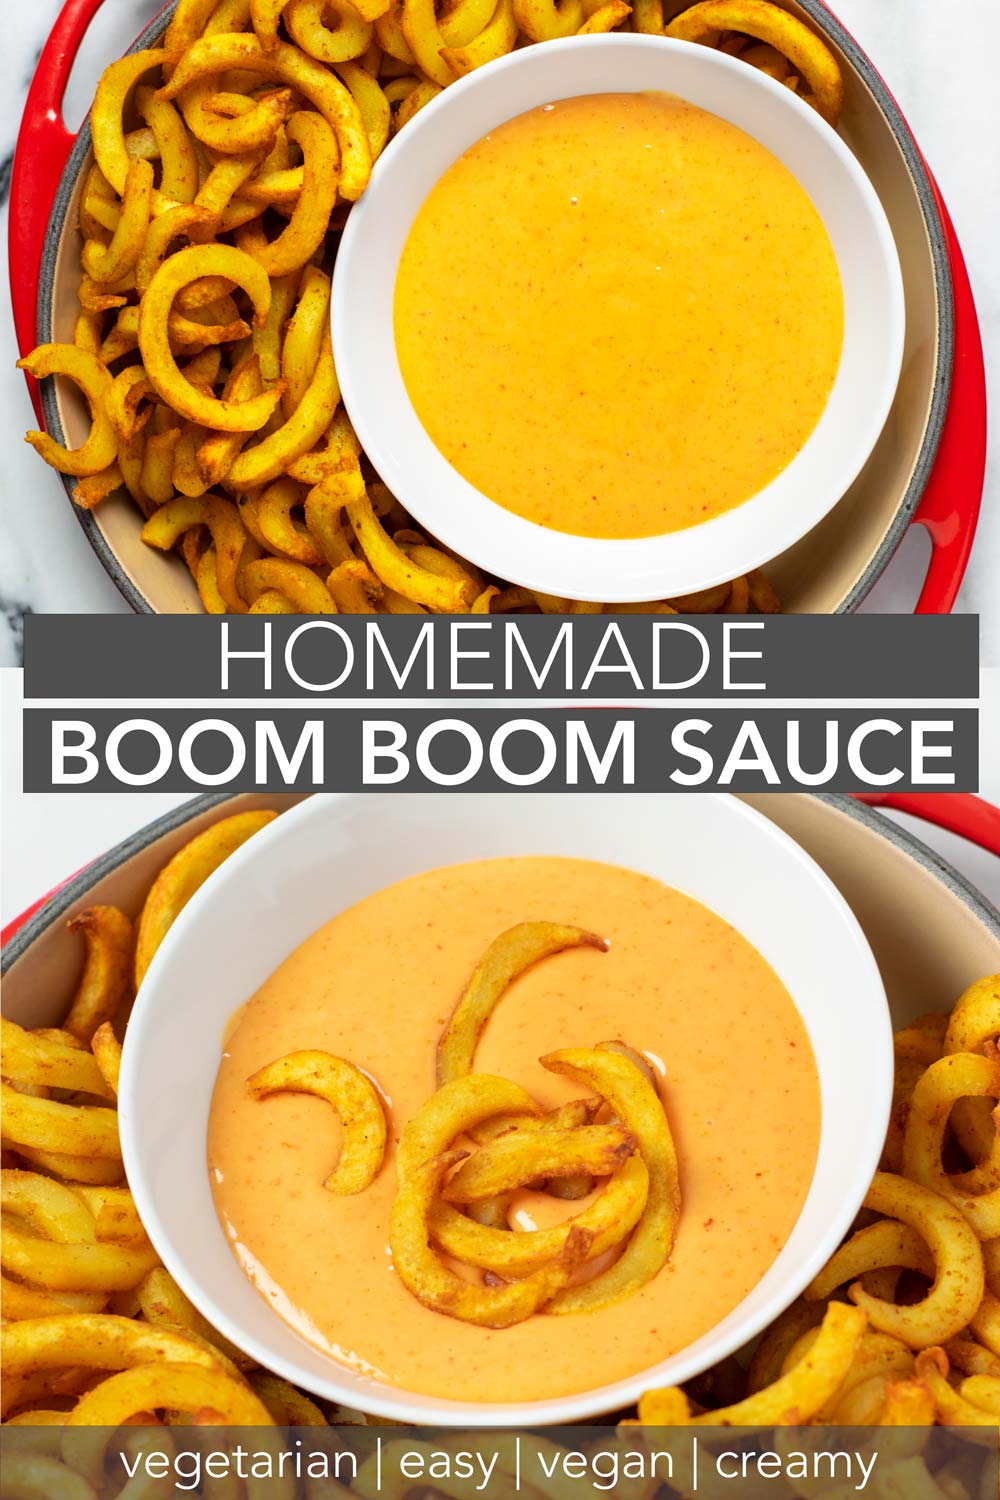 Collage of two pictures of the Boom Boom Sauce with recipe title text.